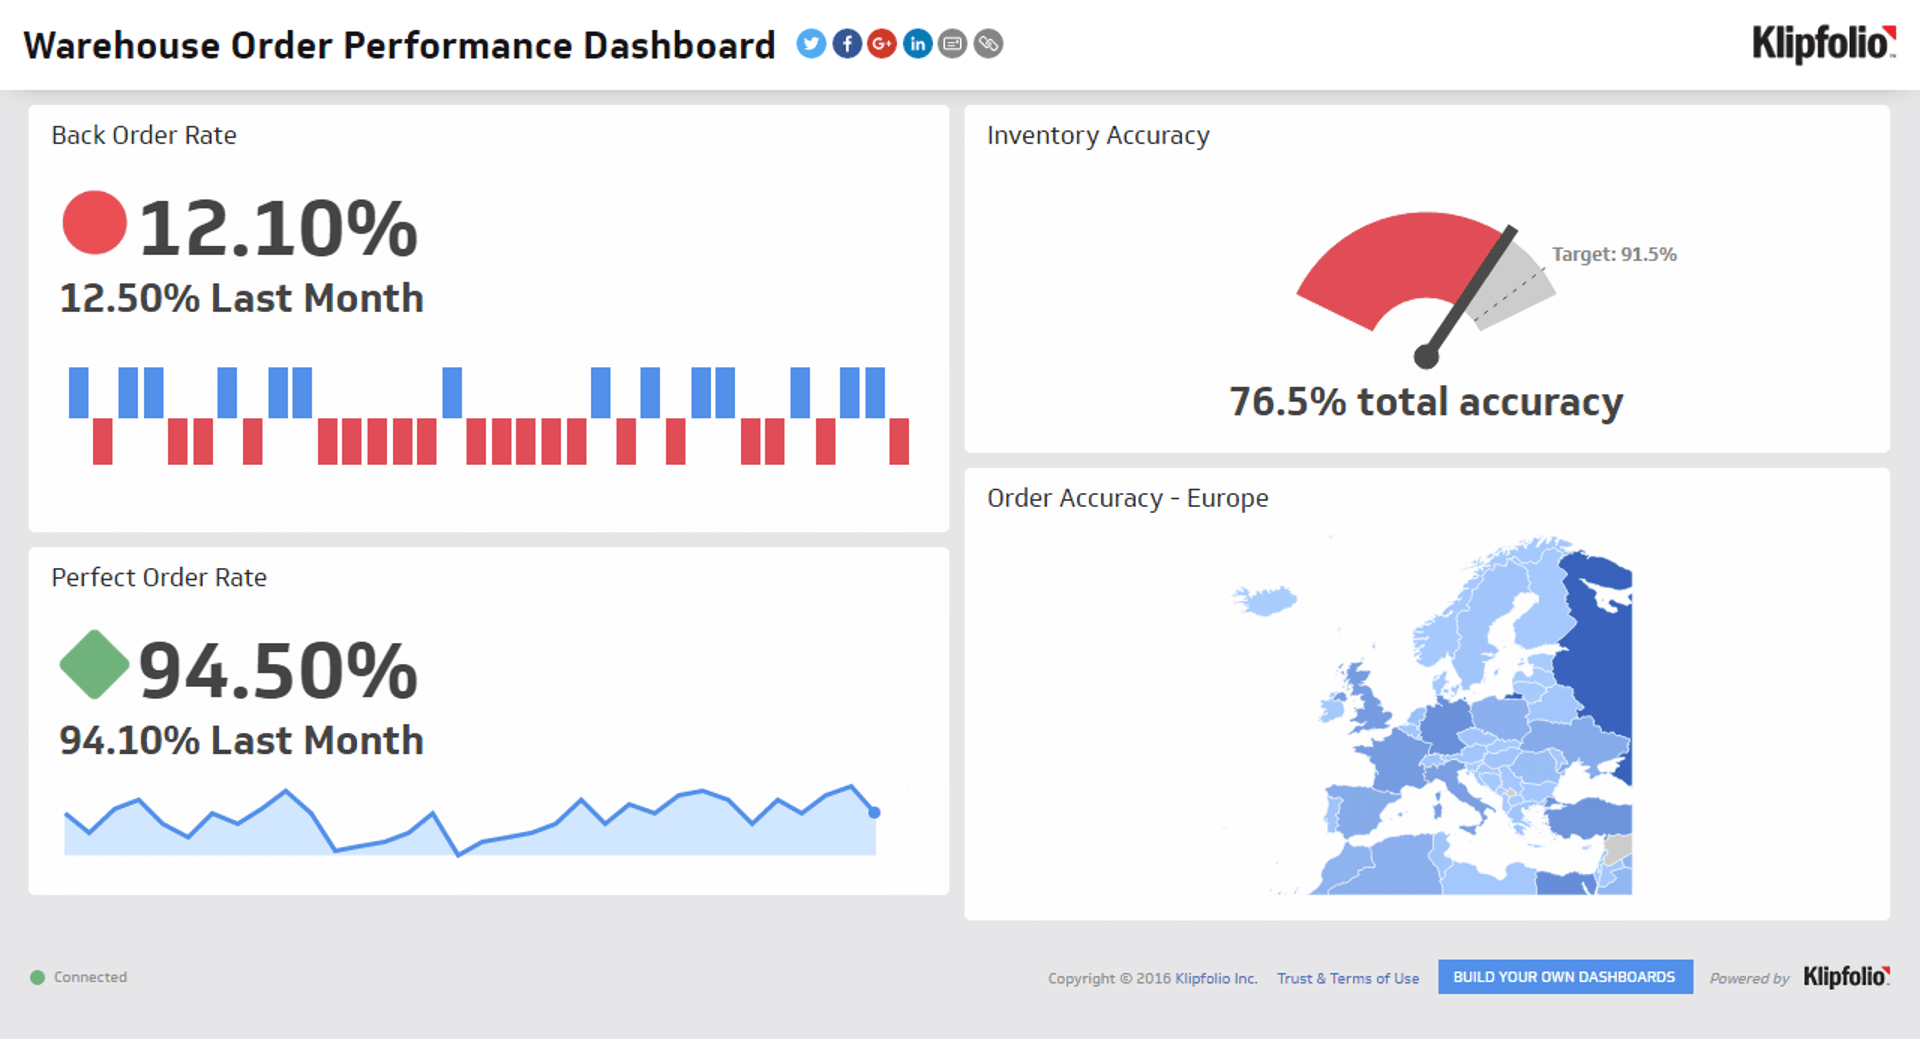 Supply Chain Dashboard Examples - Warehouse Order Performance Dashboard